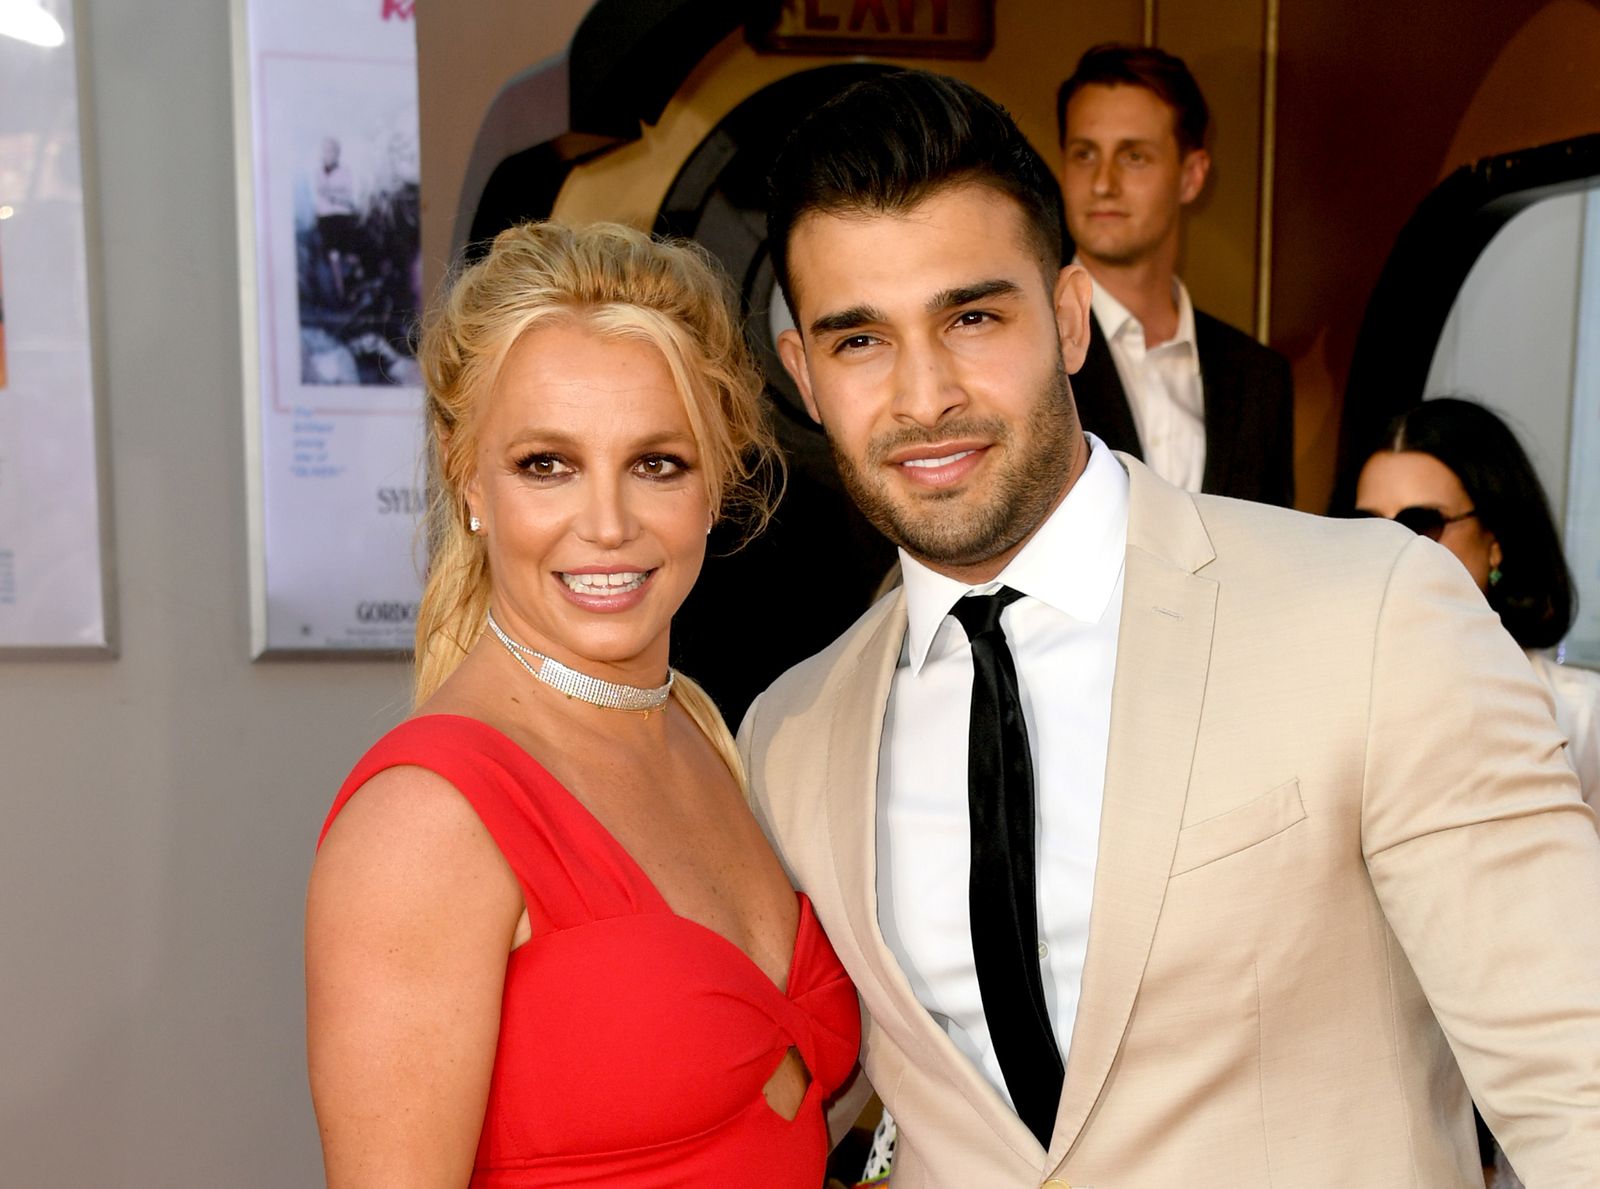 Britney Spears and Sam Asghari at the premiere of Sony Pictures' "One Upon A Time...In Hollywood" on July 22, 2019 | Getty Images